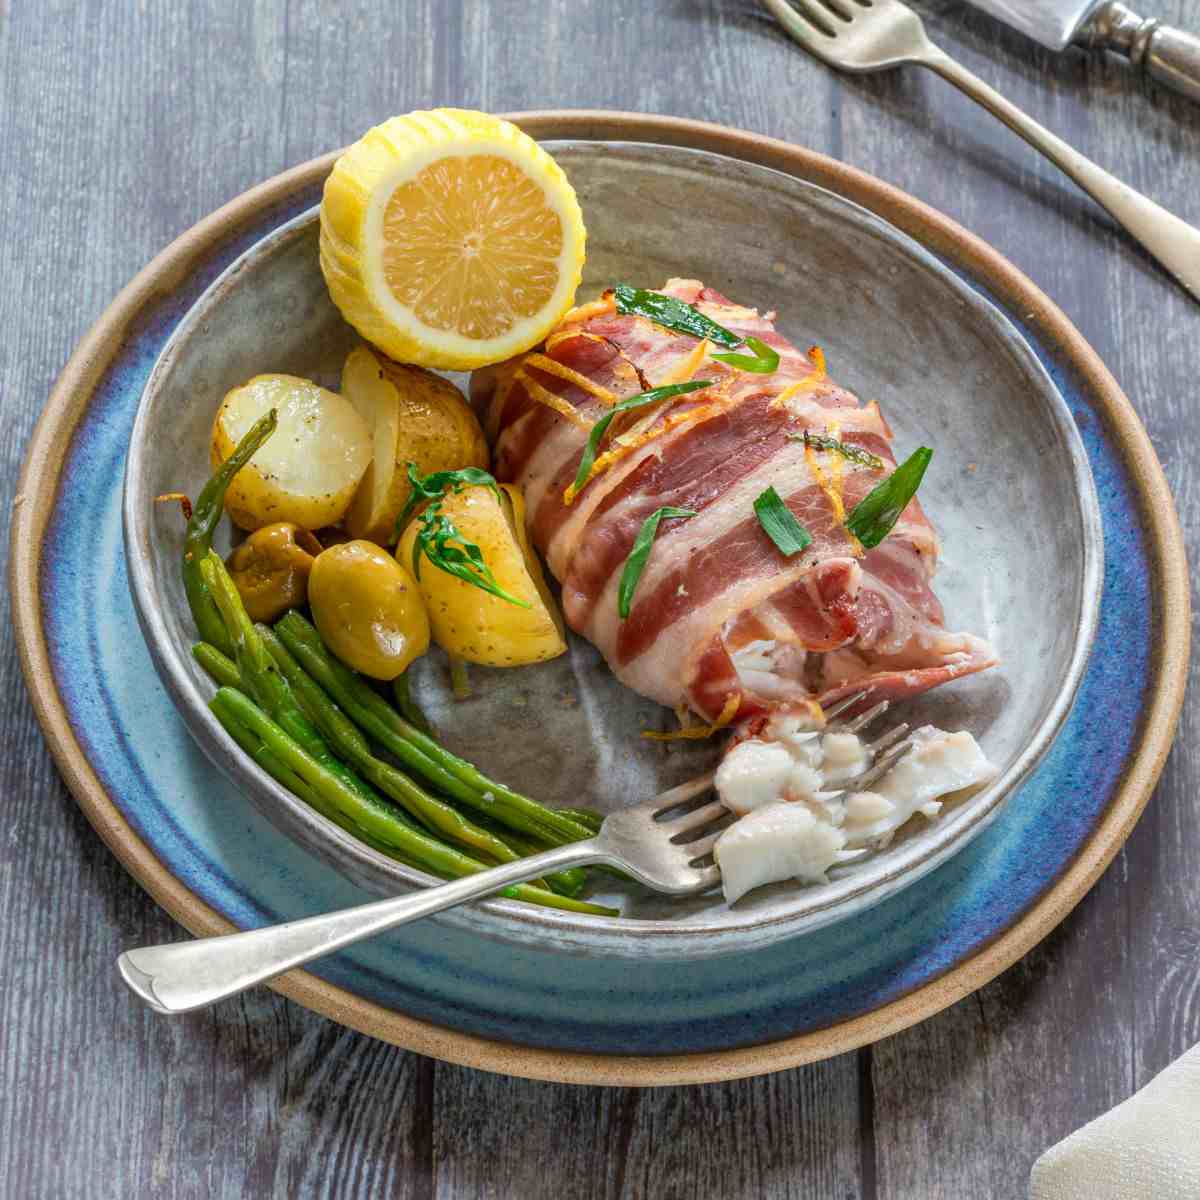 Bacon wrapped haddock with beans, potatoes and lemon slices.